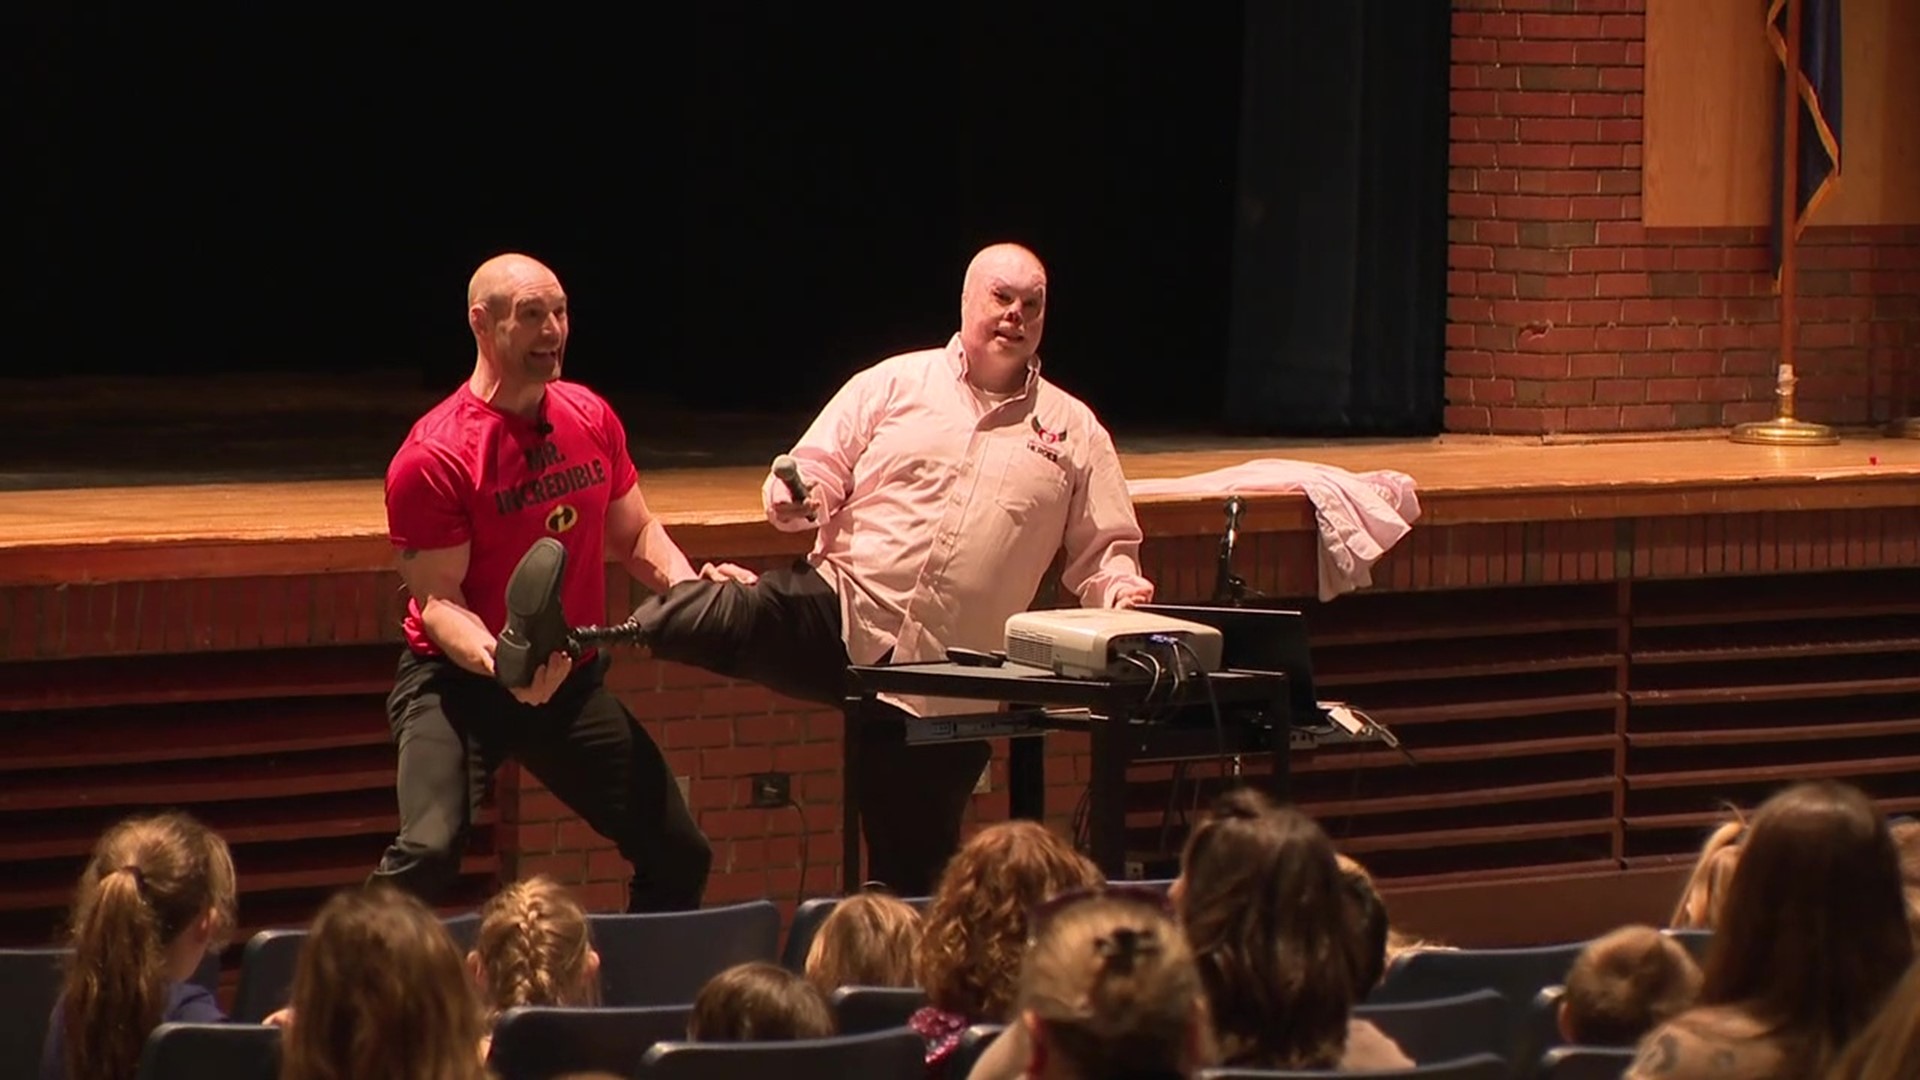 Some superheroes without capes were in Mifflinburg on Wednesday, talking to students about bullying and spreading hope.